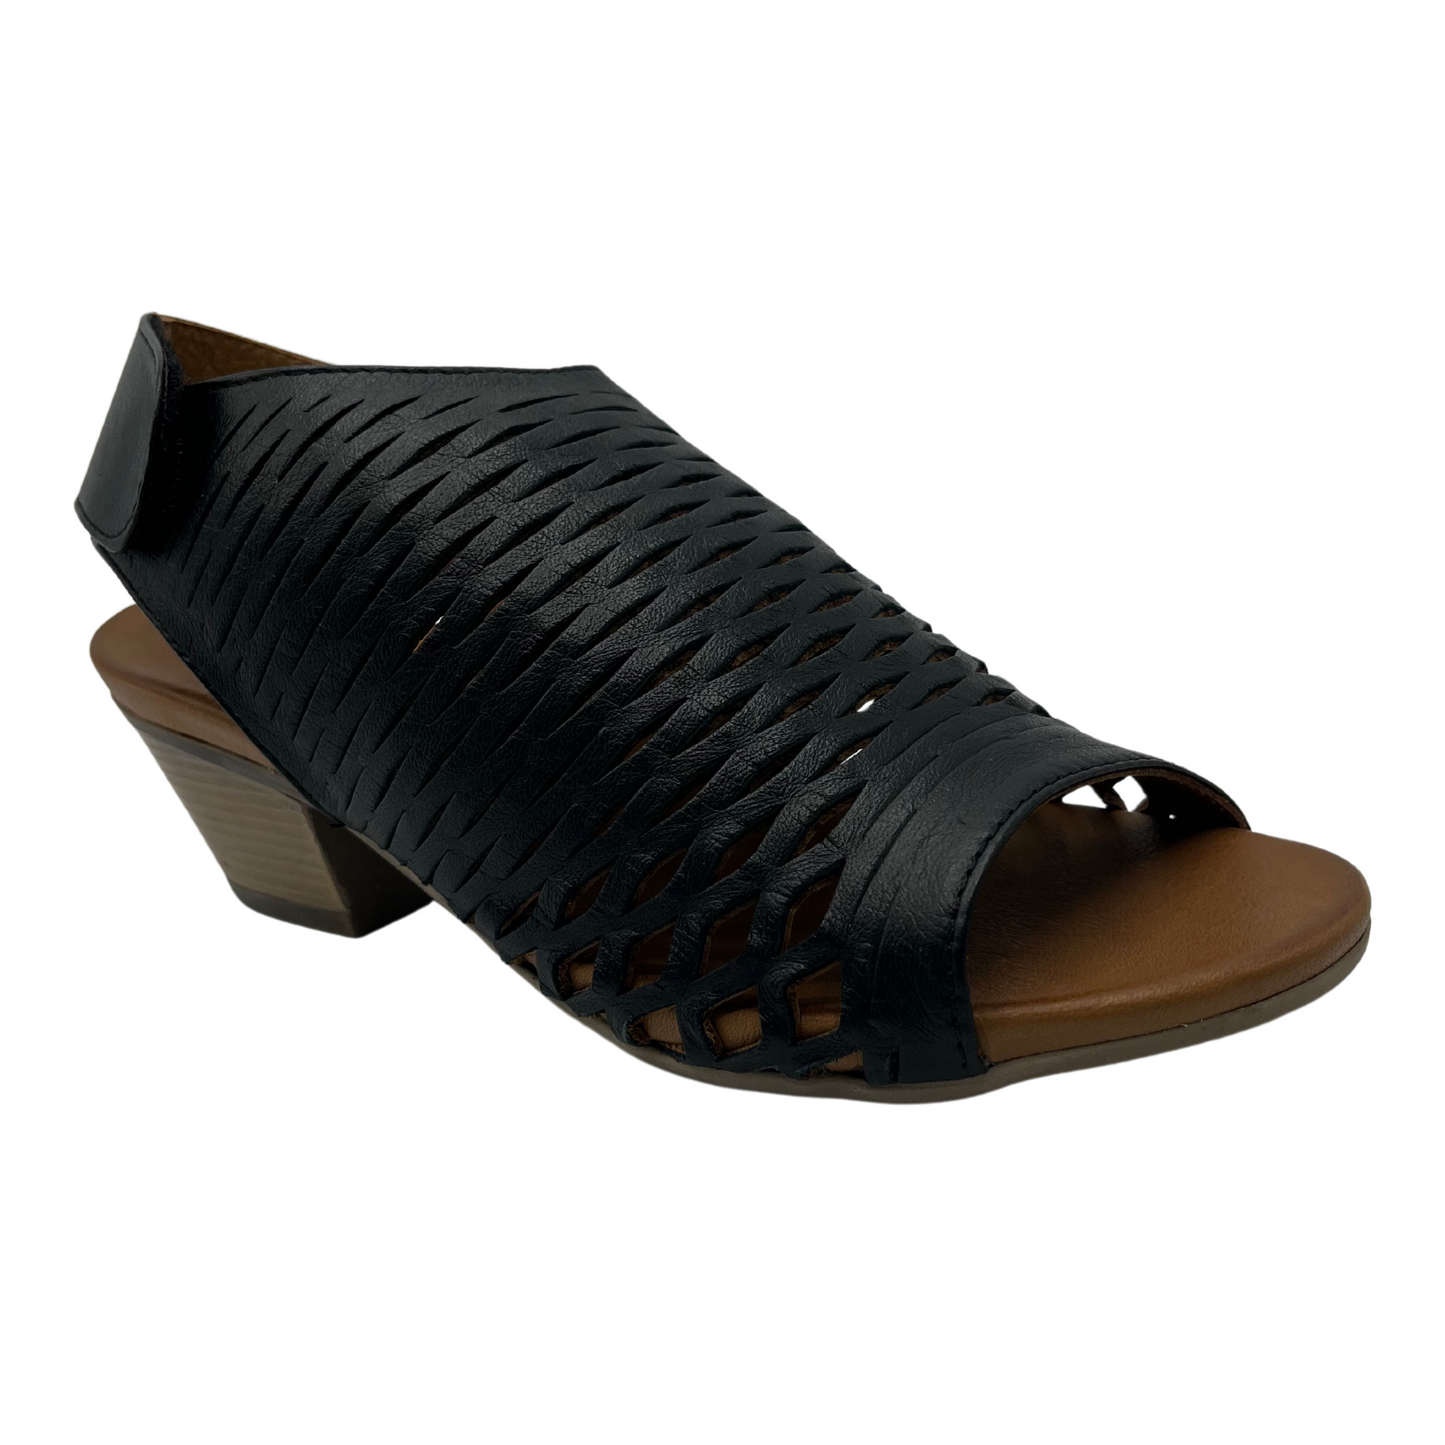 45 degree angled view of black leather sandal with cutout details and block heel